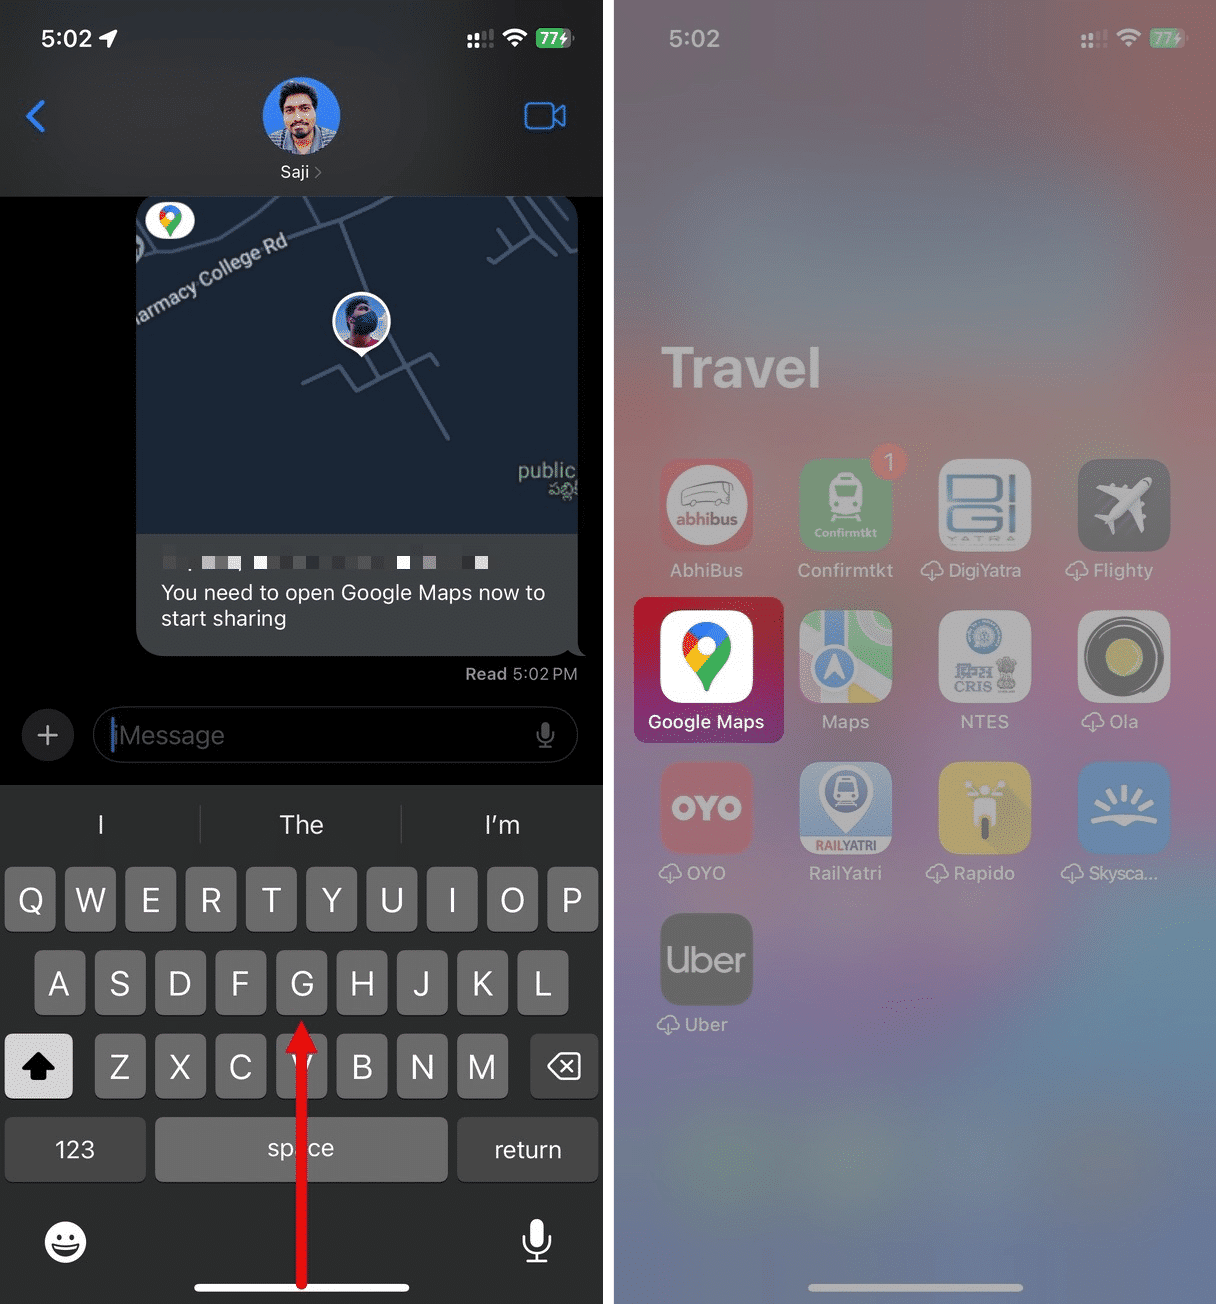 Swipe up from bottom and open Google Maps on your iPhone